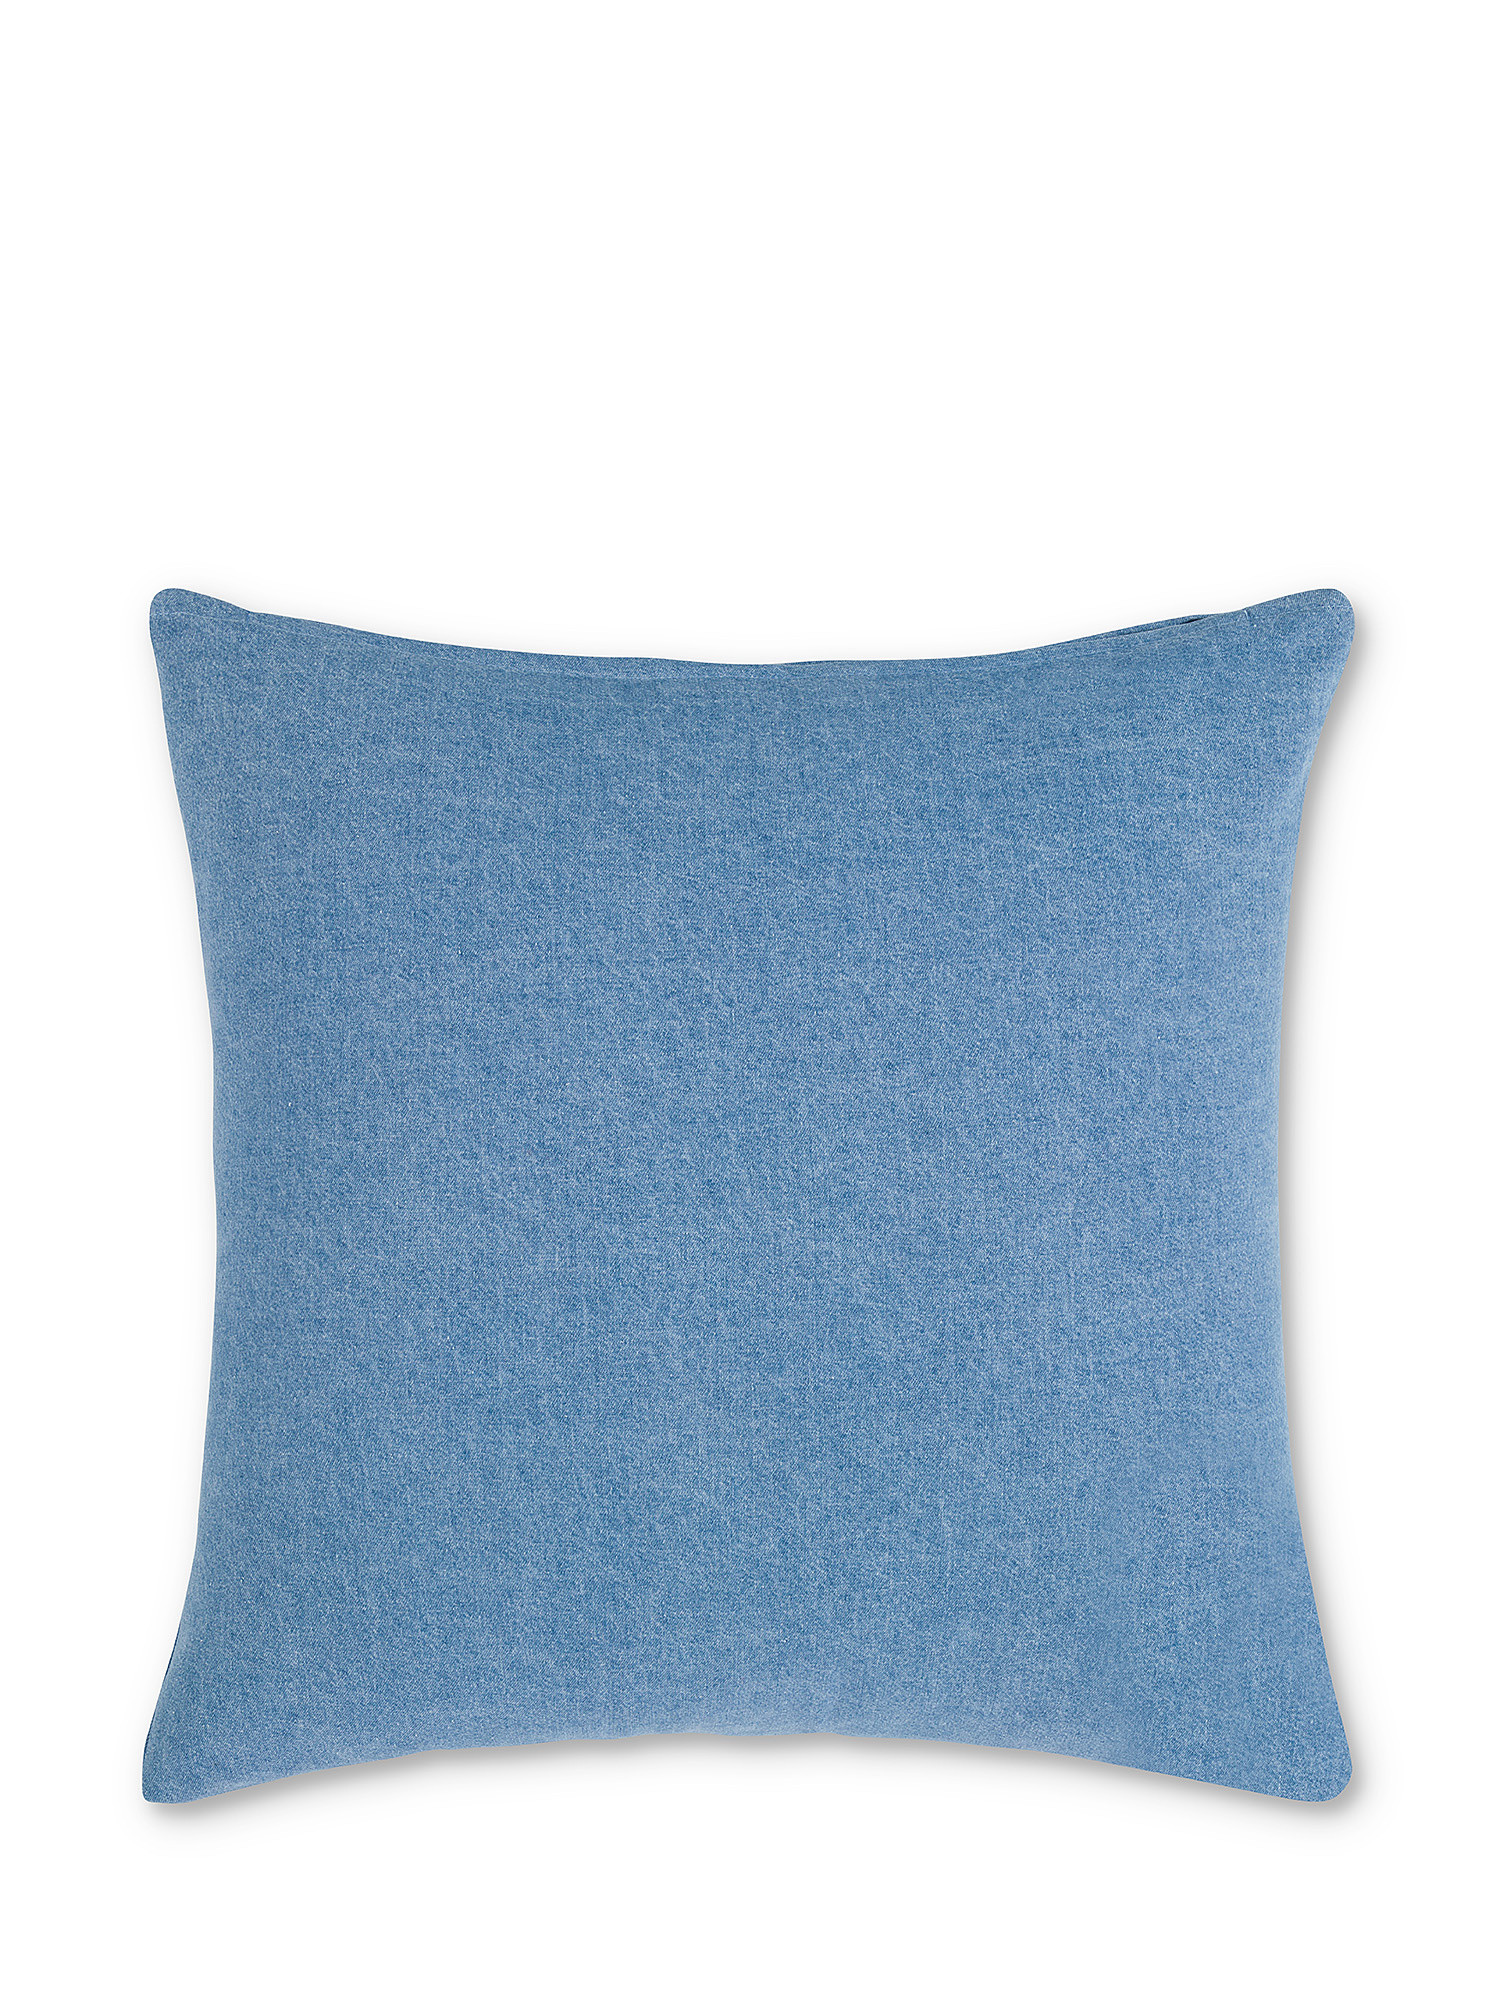 Cotton denim cushion with polka dot embroidery 45x45cm, Light Blue, large image number 1